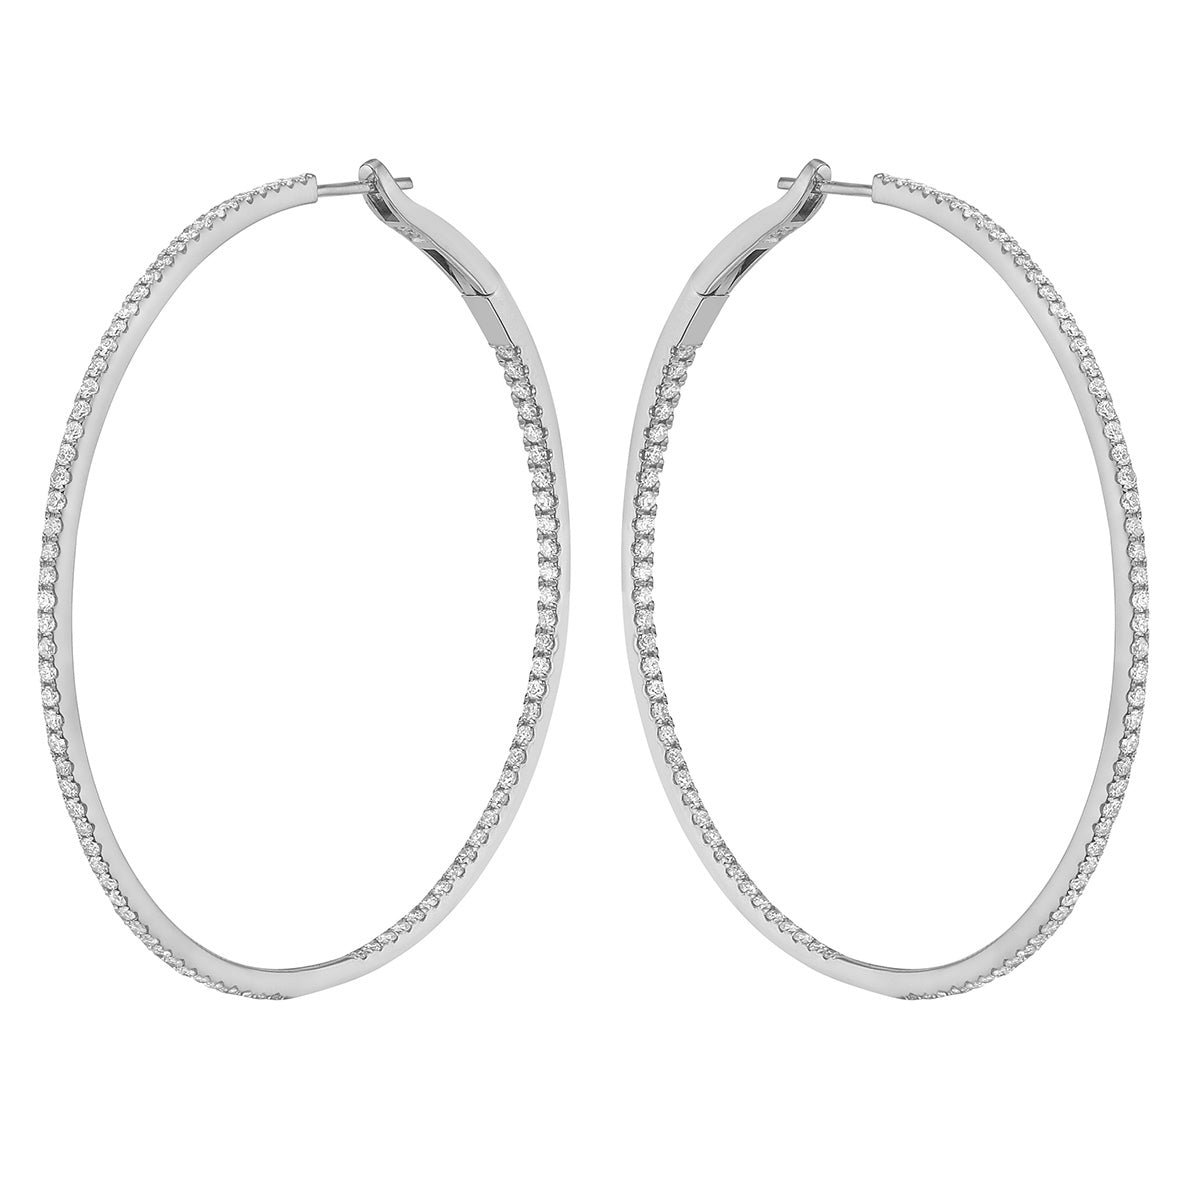 2.0  in White Gold Inside and Out Diamond Hoop Earrings